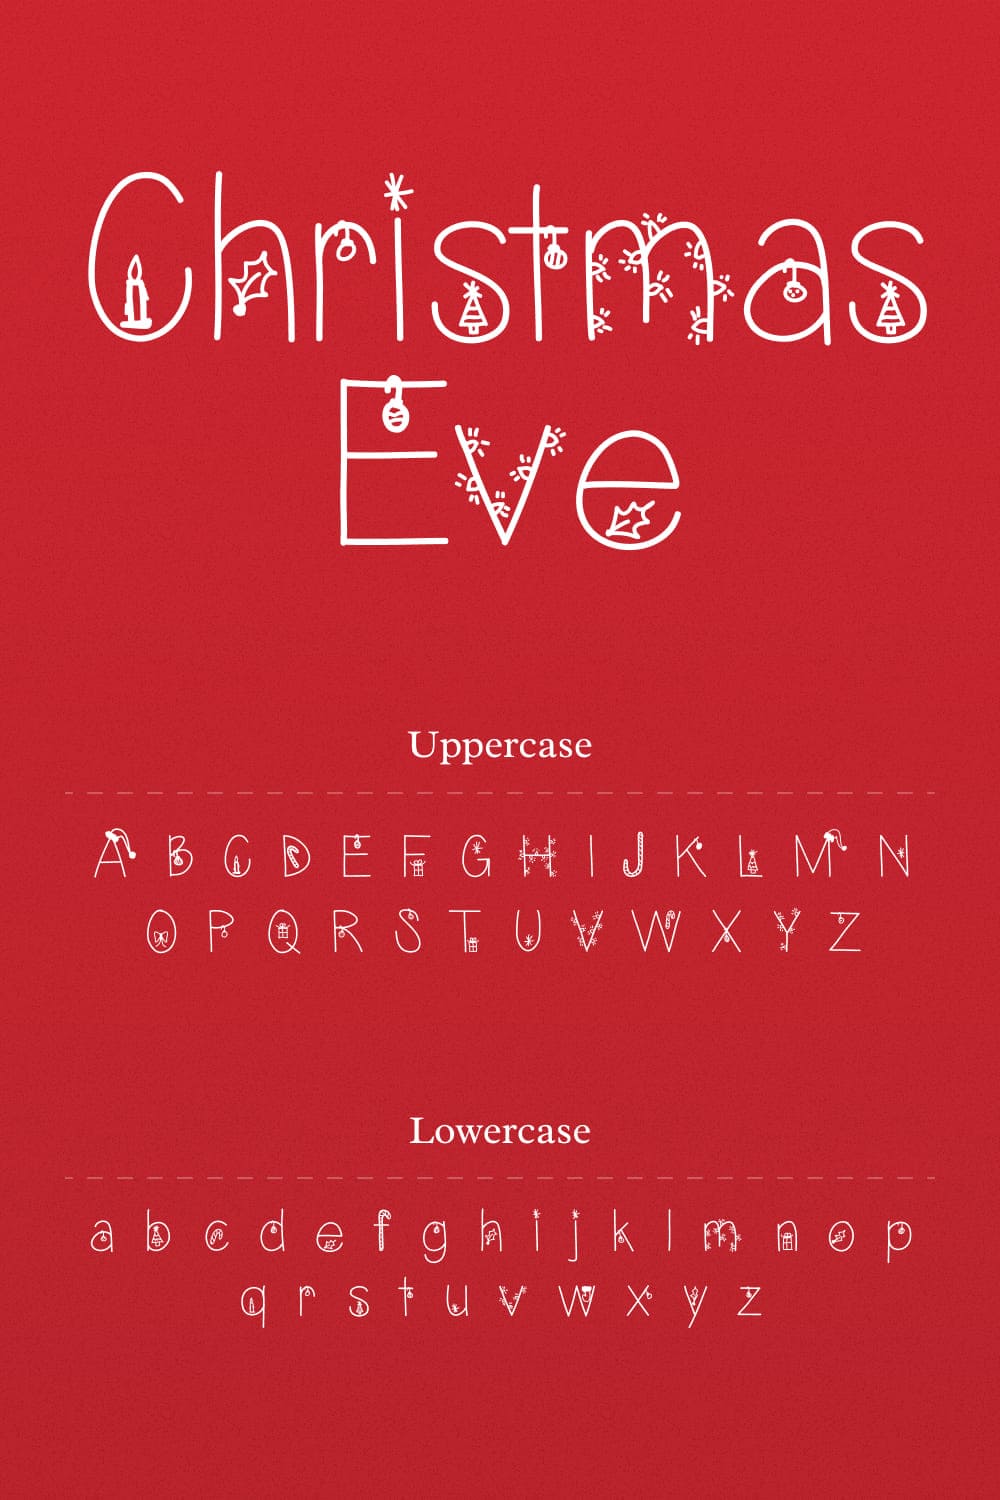 Numeric option of the font on the festive background.